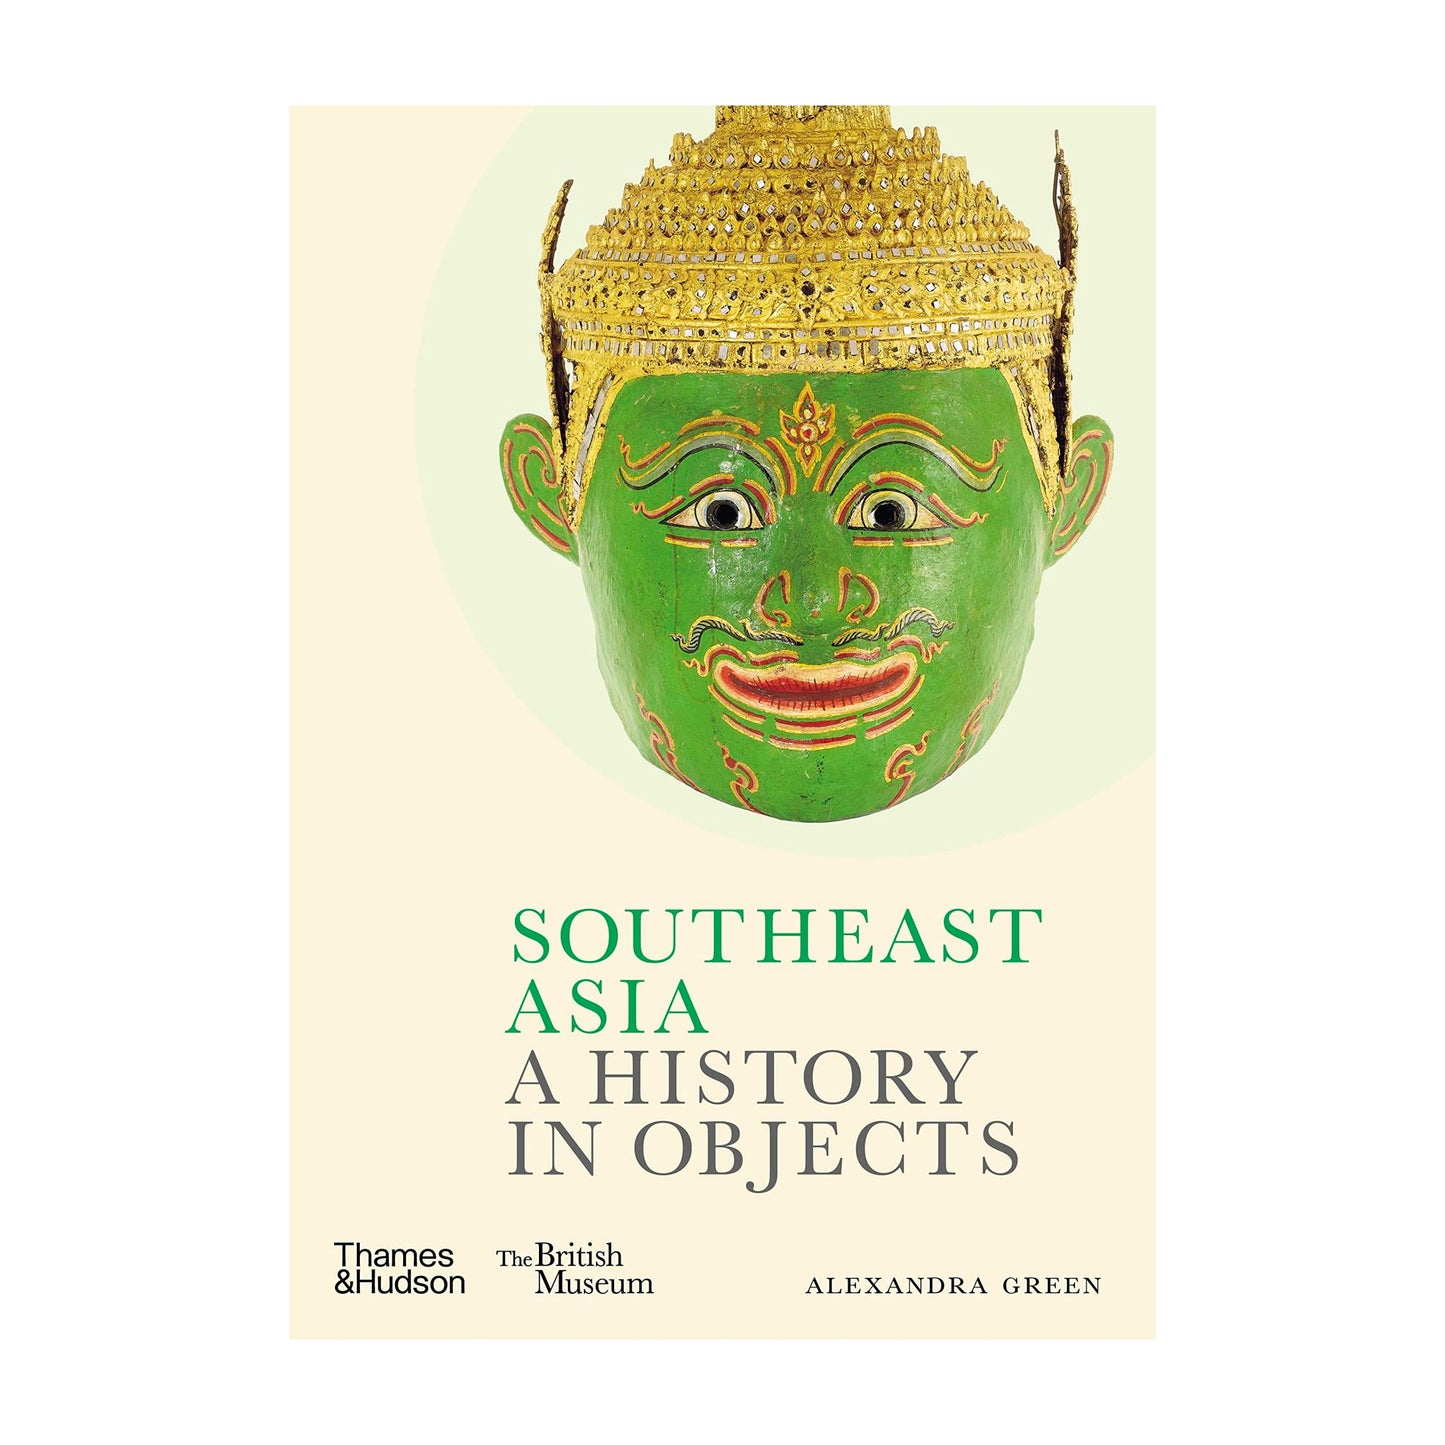 Southeast Asia: A History in Objects